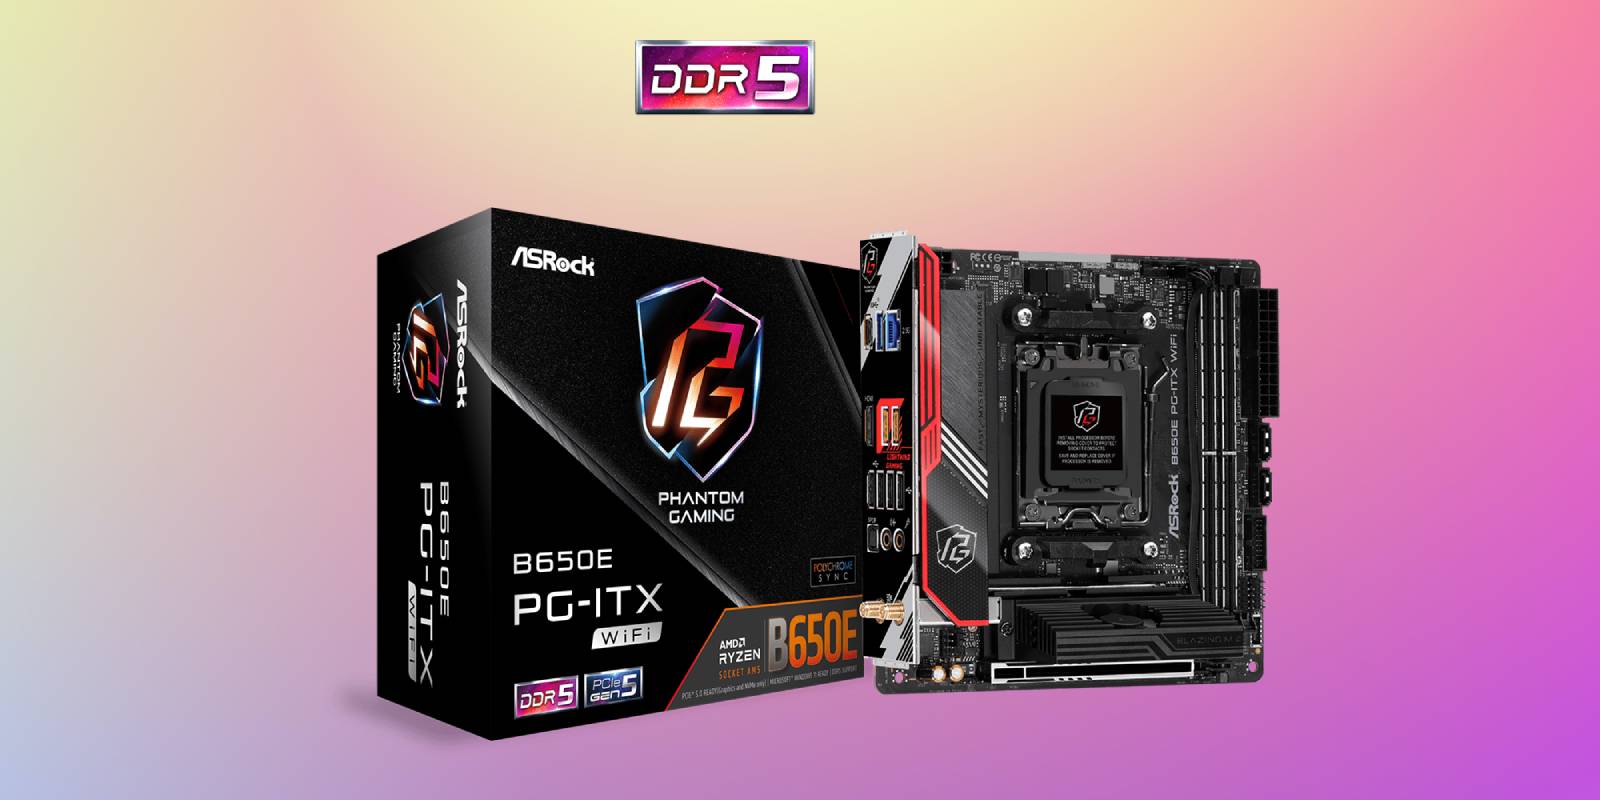 ASRock B650 motherboard with box